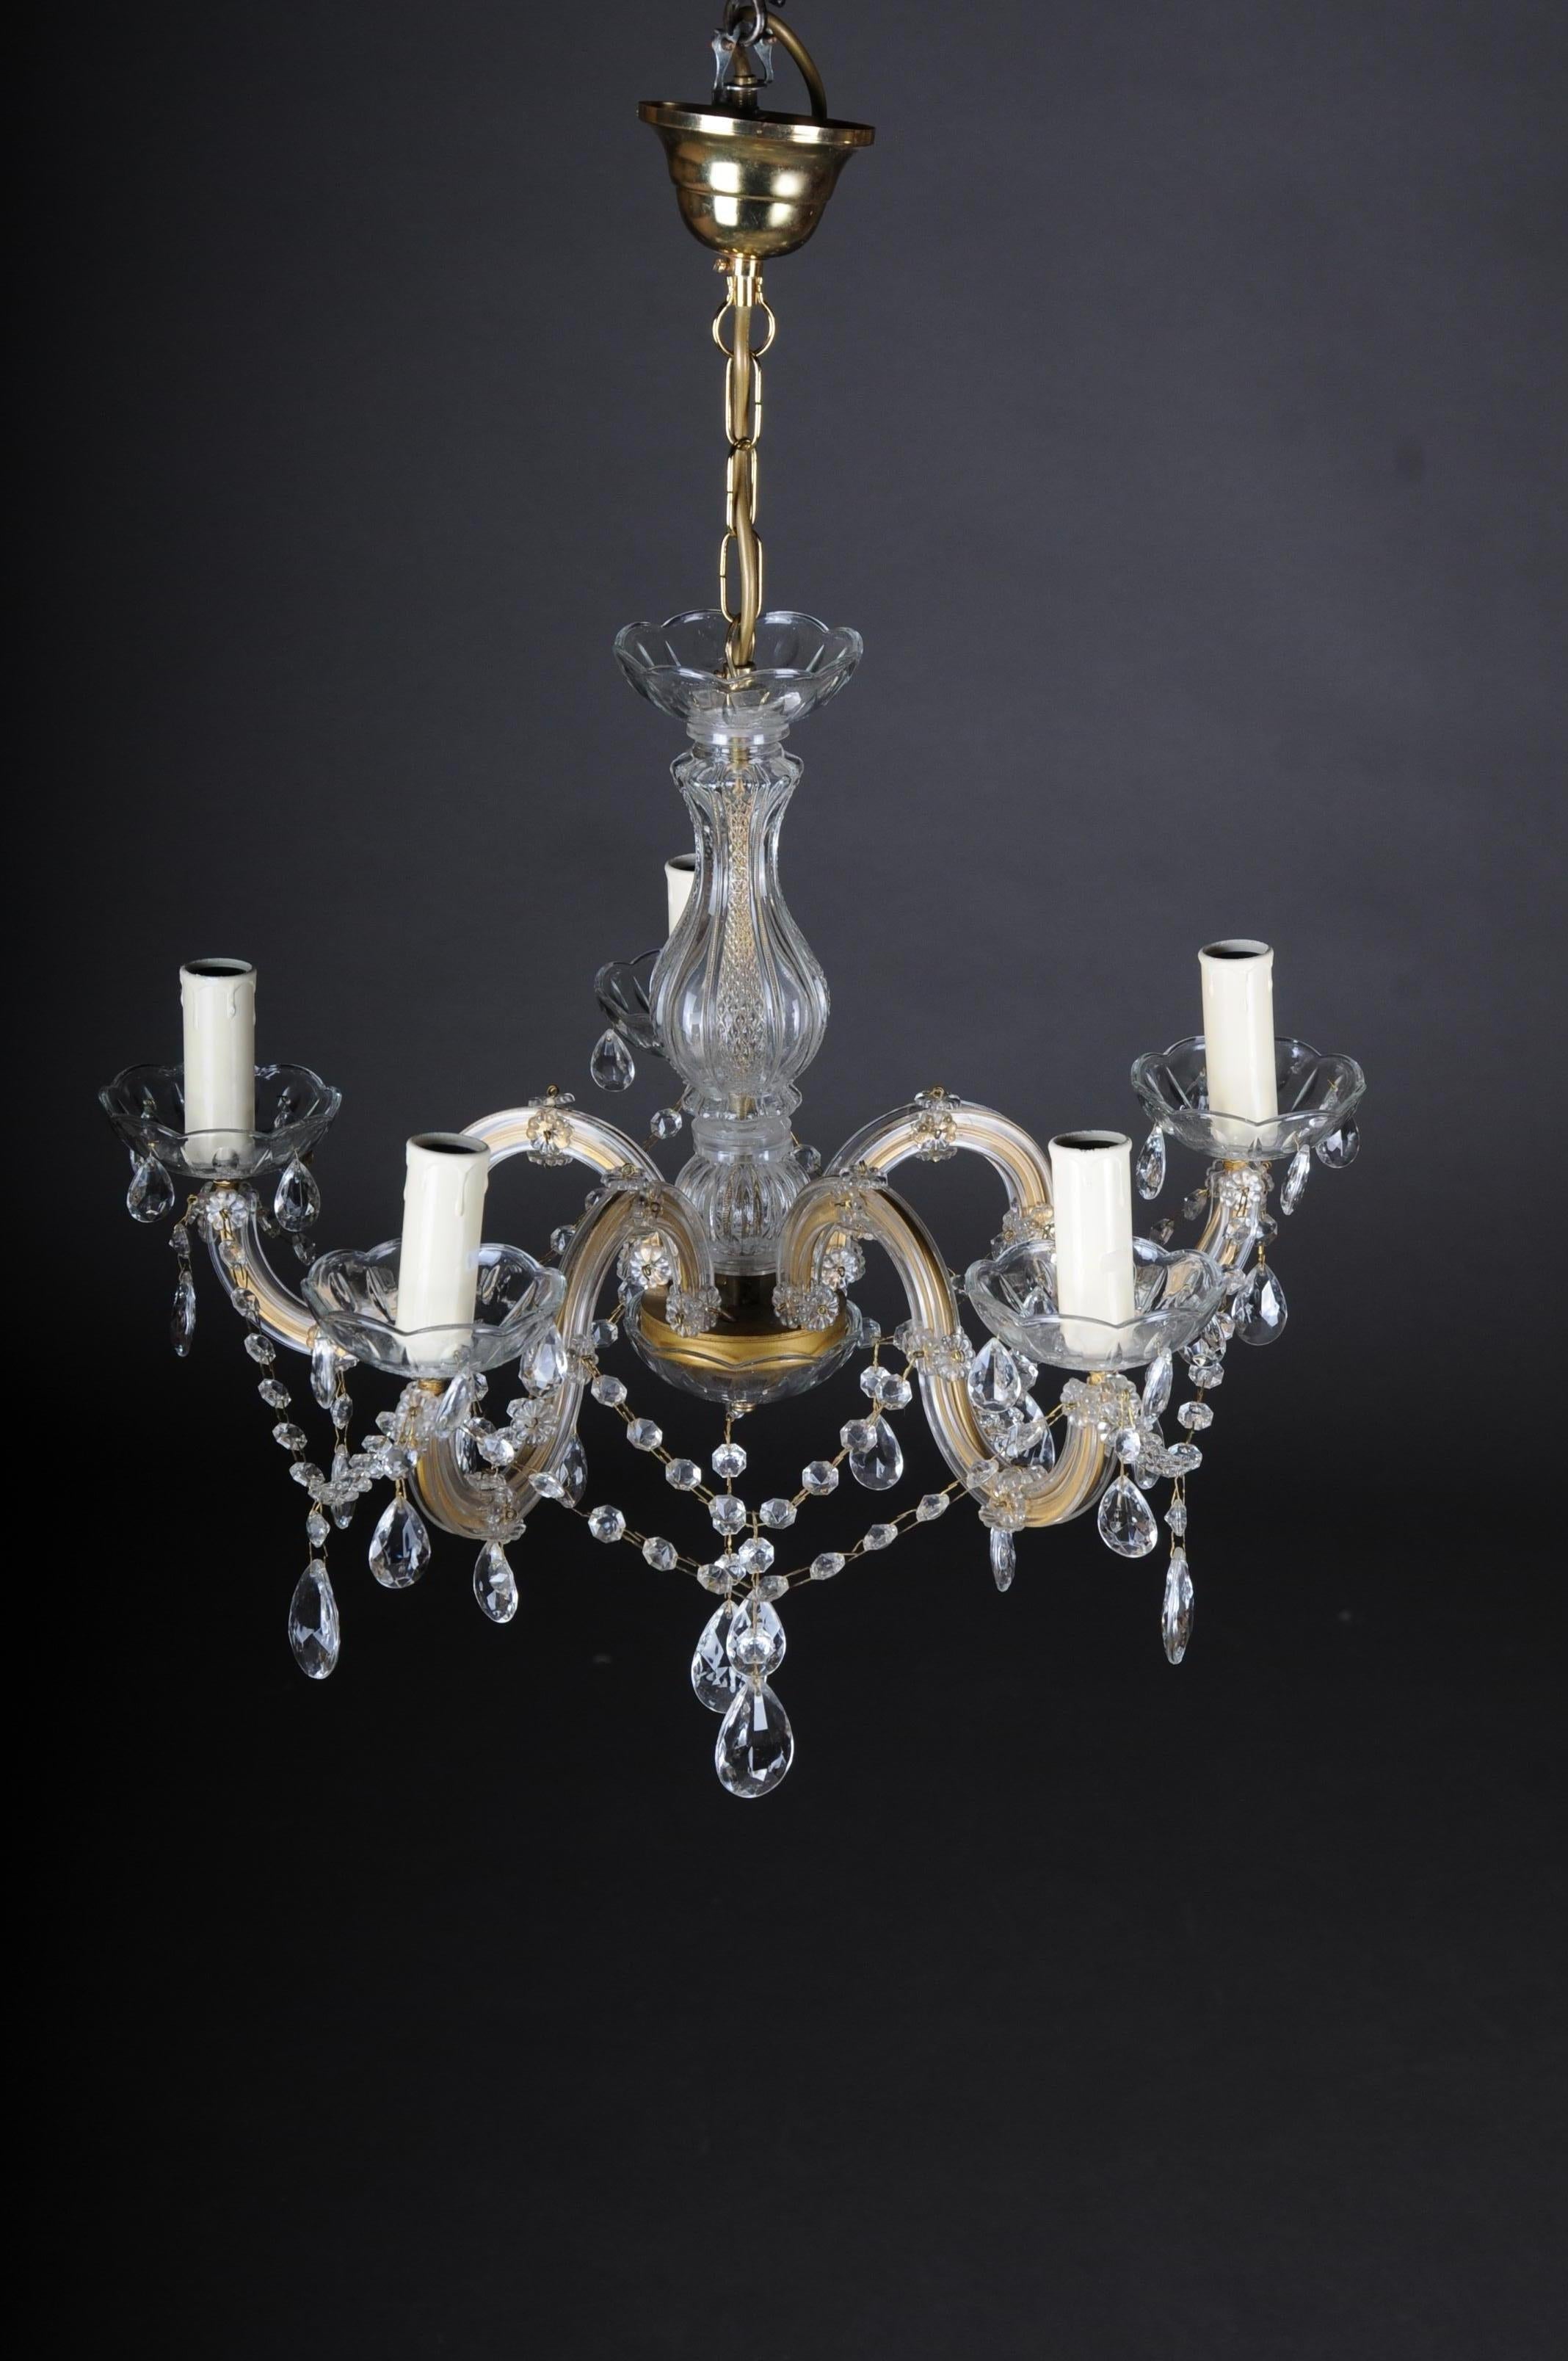 20th century beautiful Maria Theresia chandelier / lamp

Brass, chased. High baluster-shaped body. Five-armed lights, electrified with crystal hangings, richly faceted. Extremely decorative and high quality workmanship.

(F-121).